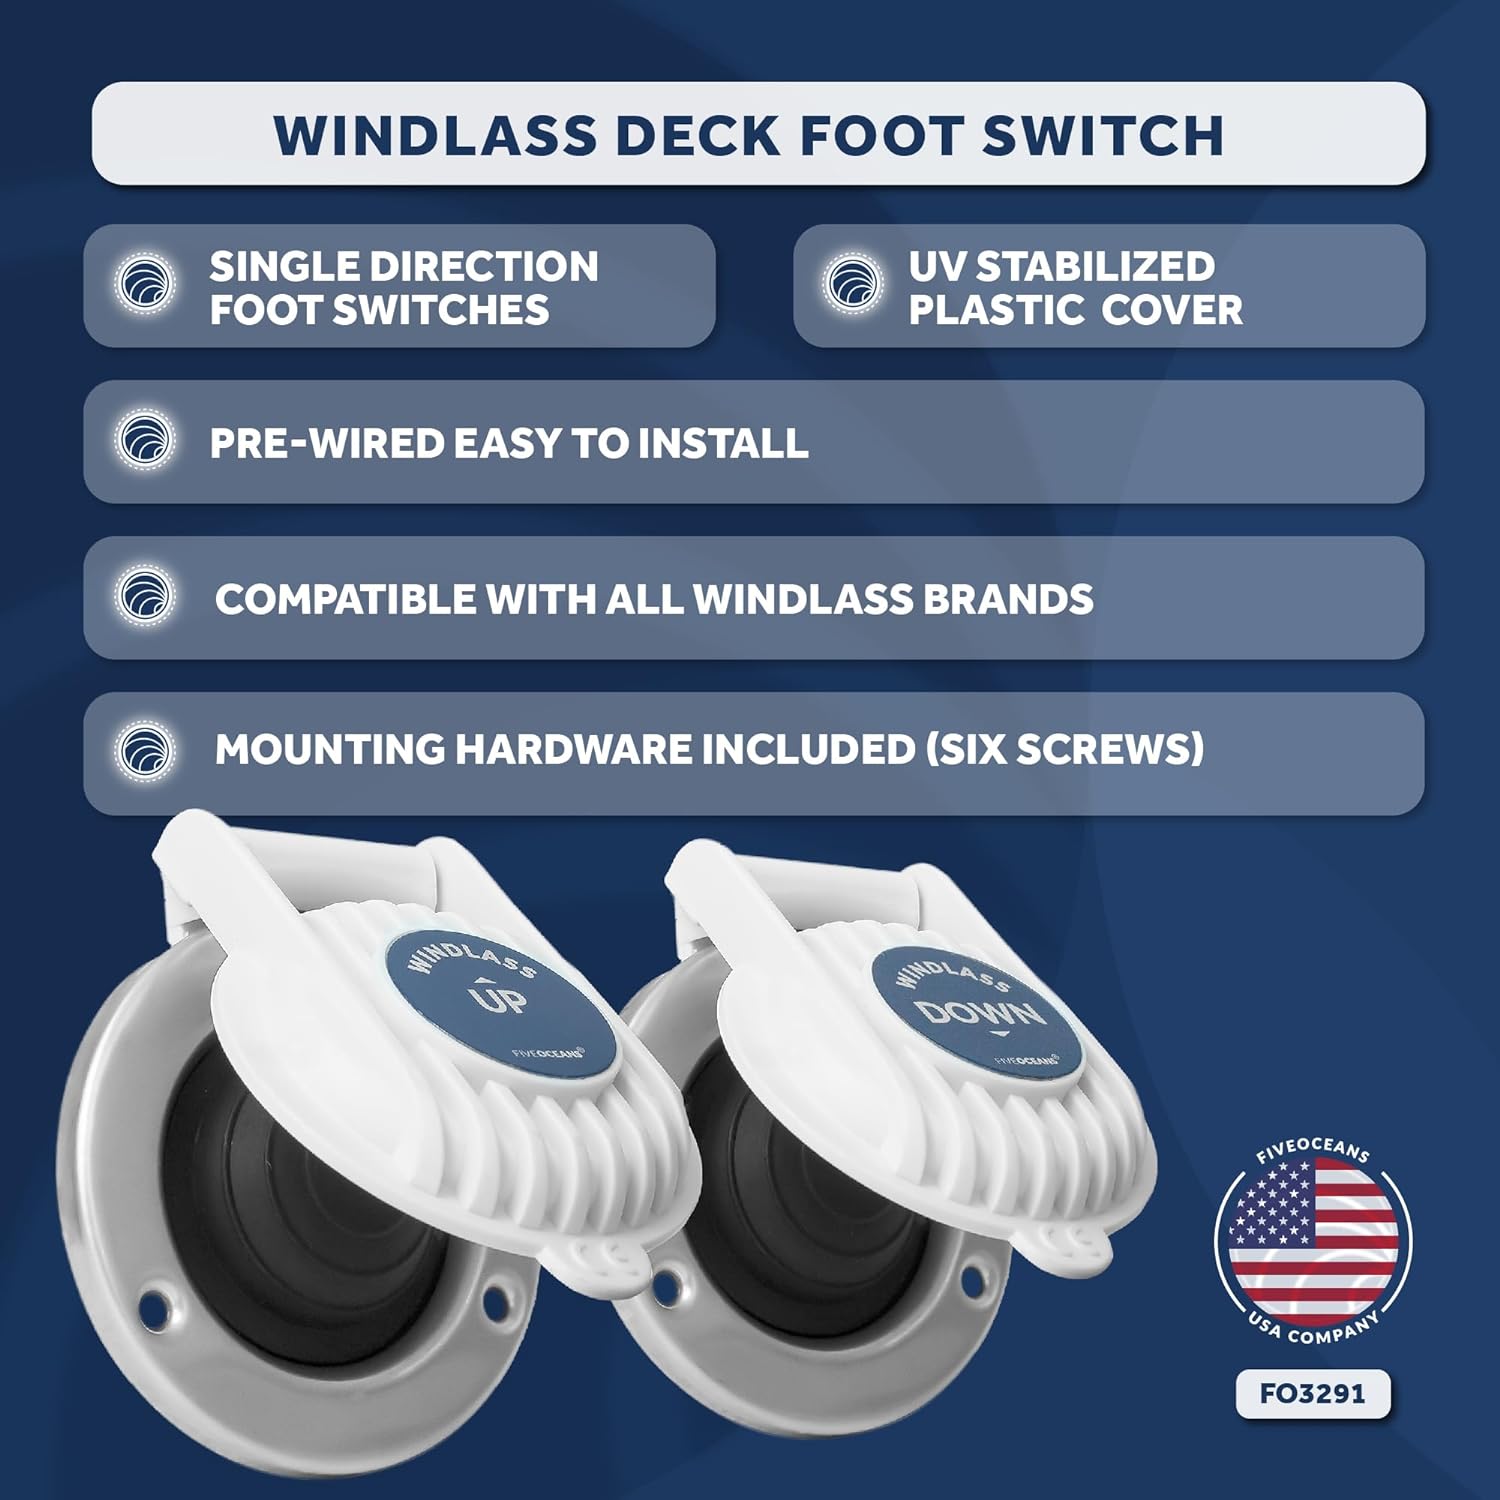 Windlass Deck Foot Switch, Up/Down Single Direction Switches - Five Oceans